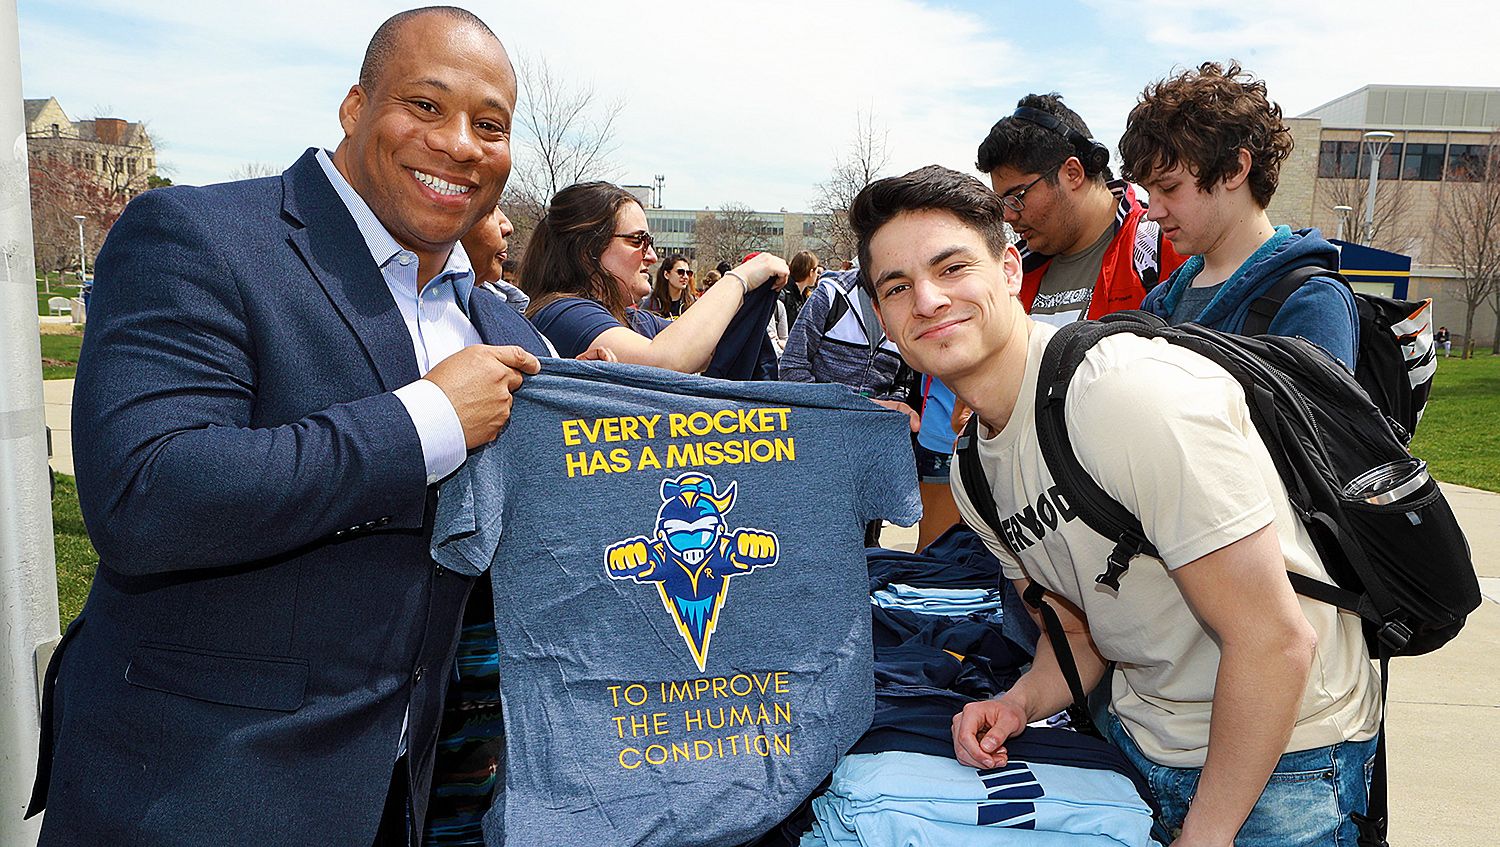 Dr. Sammy Spann in his role as associate vice president and dean of students for the Division of Student Affairs at the University of Toledo interacting with students on campus.